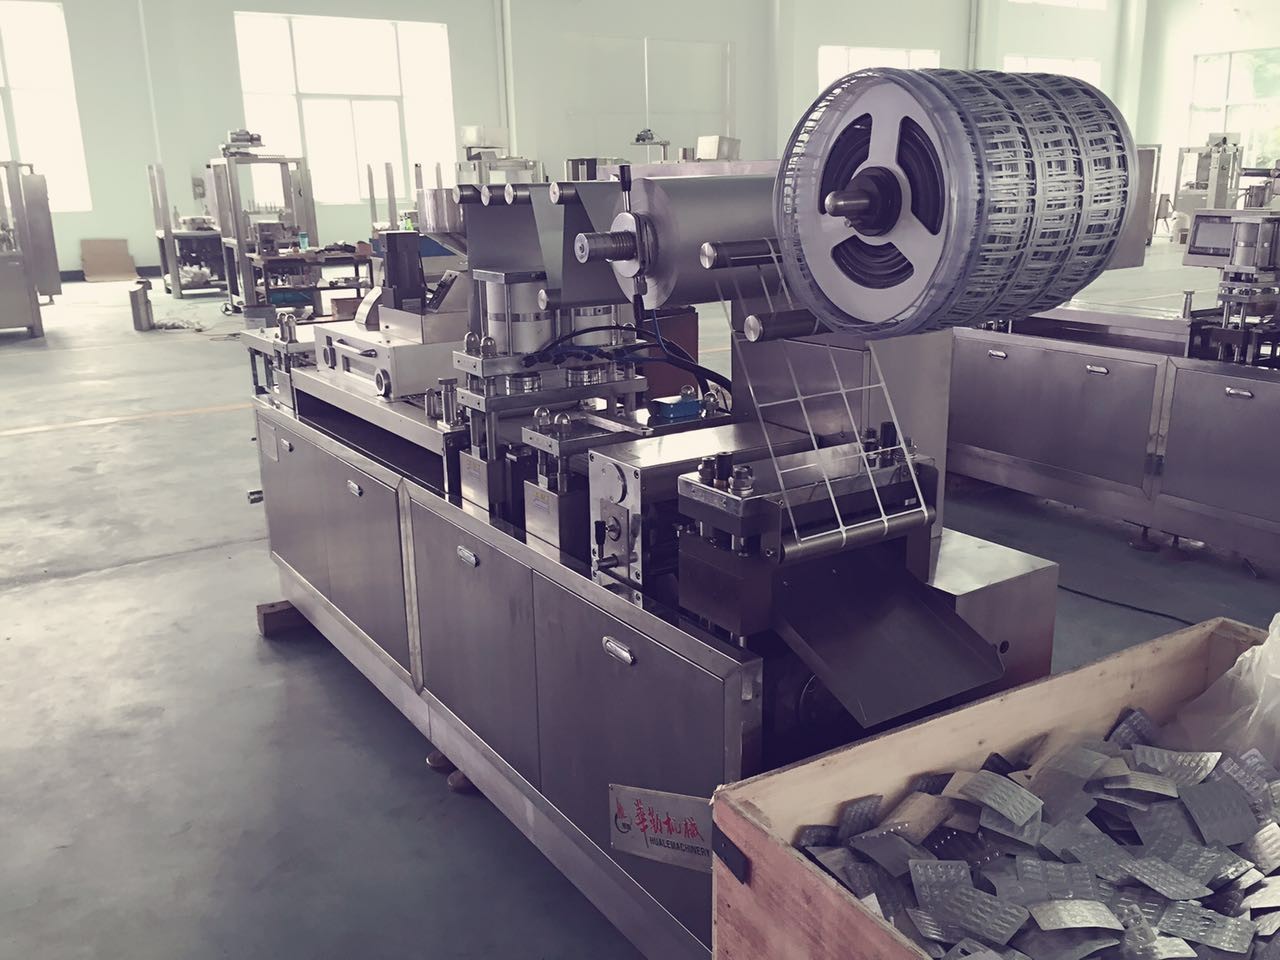 Full Automatic Blister Forming Flat Type Aluminum Plastic Blister Packing Machine